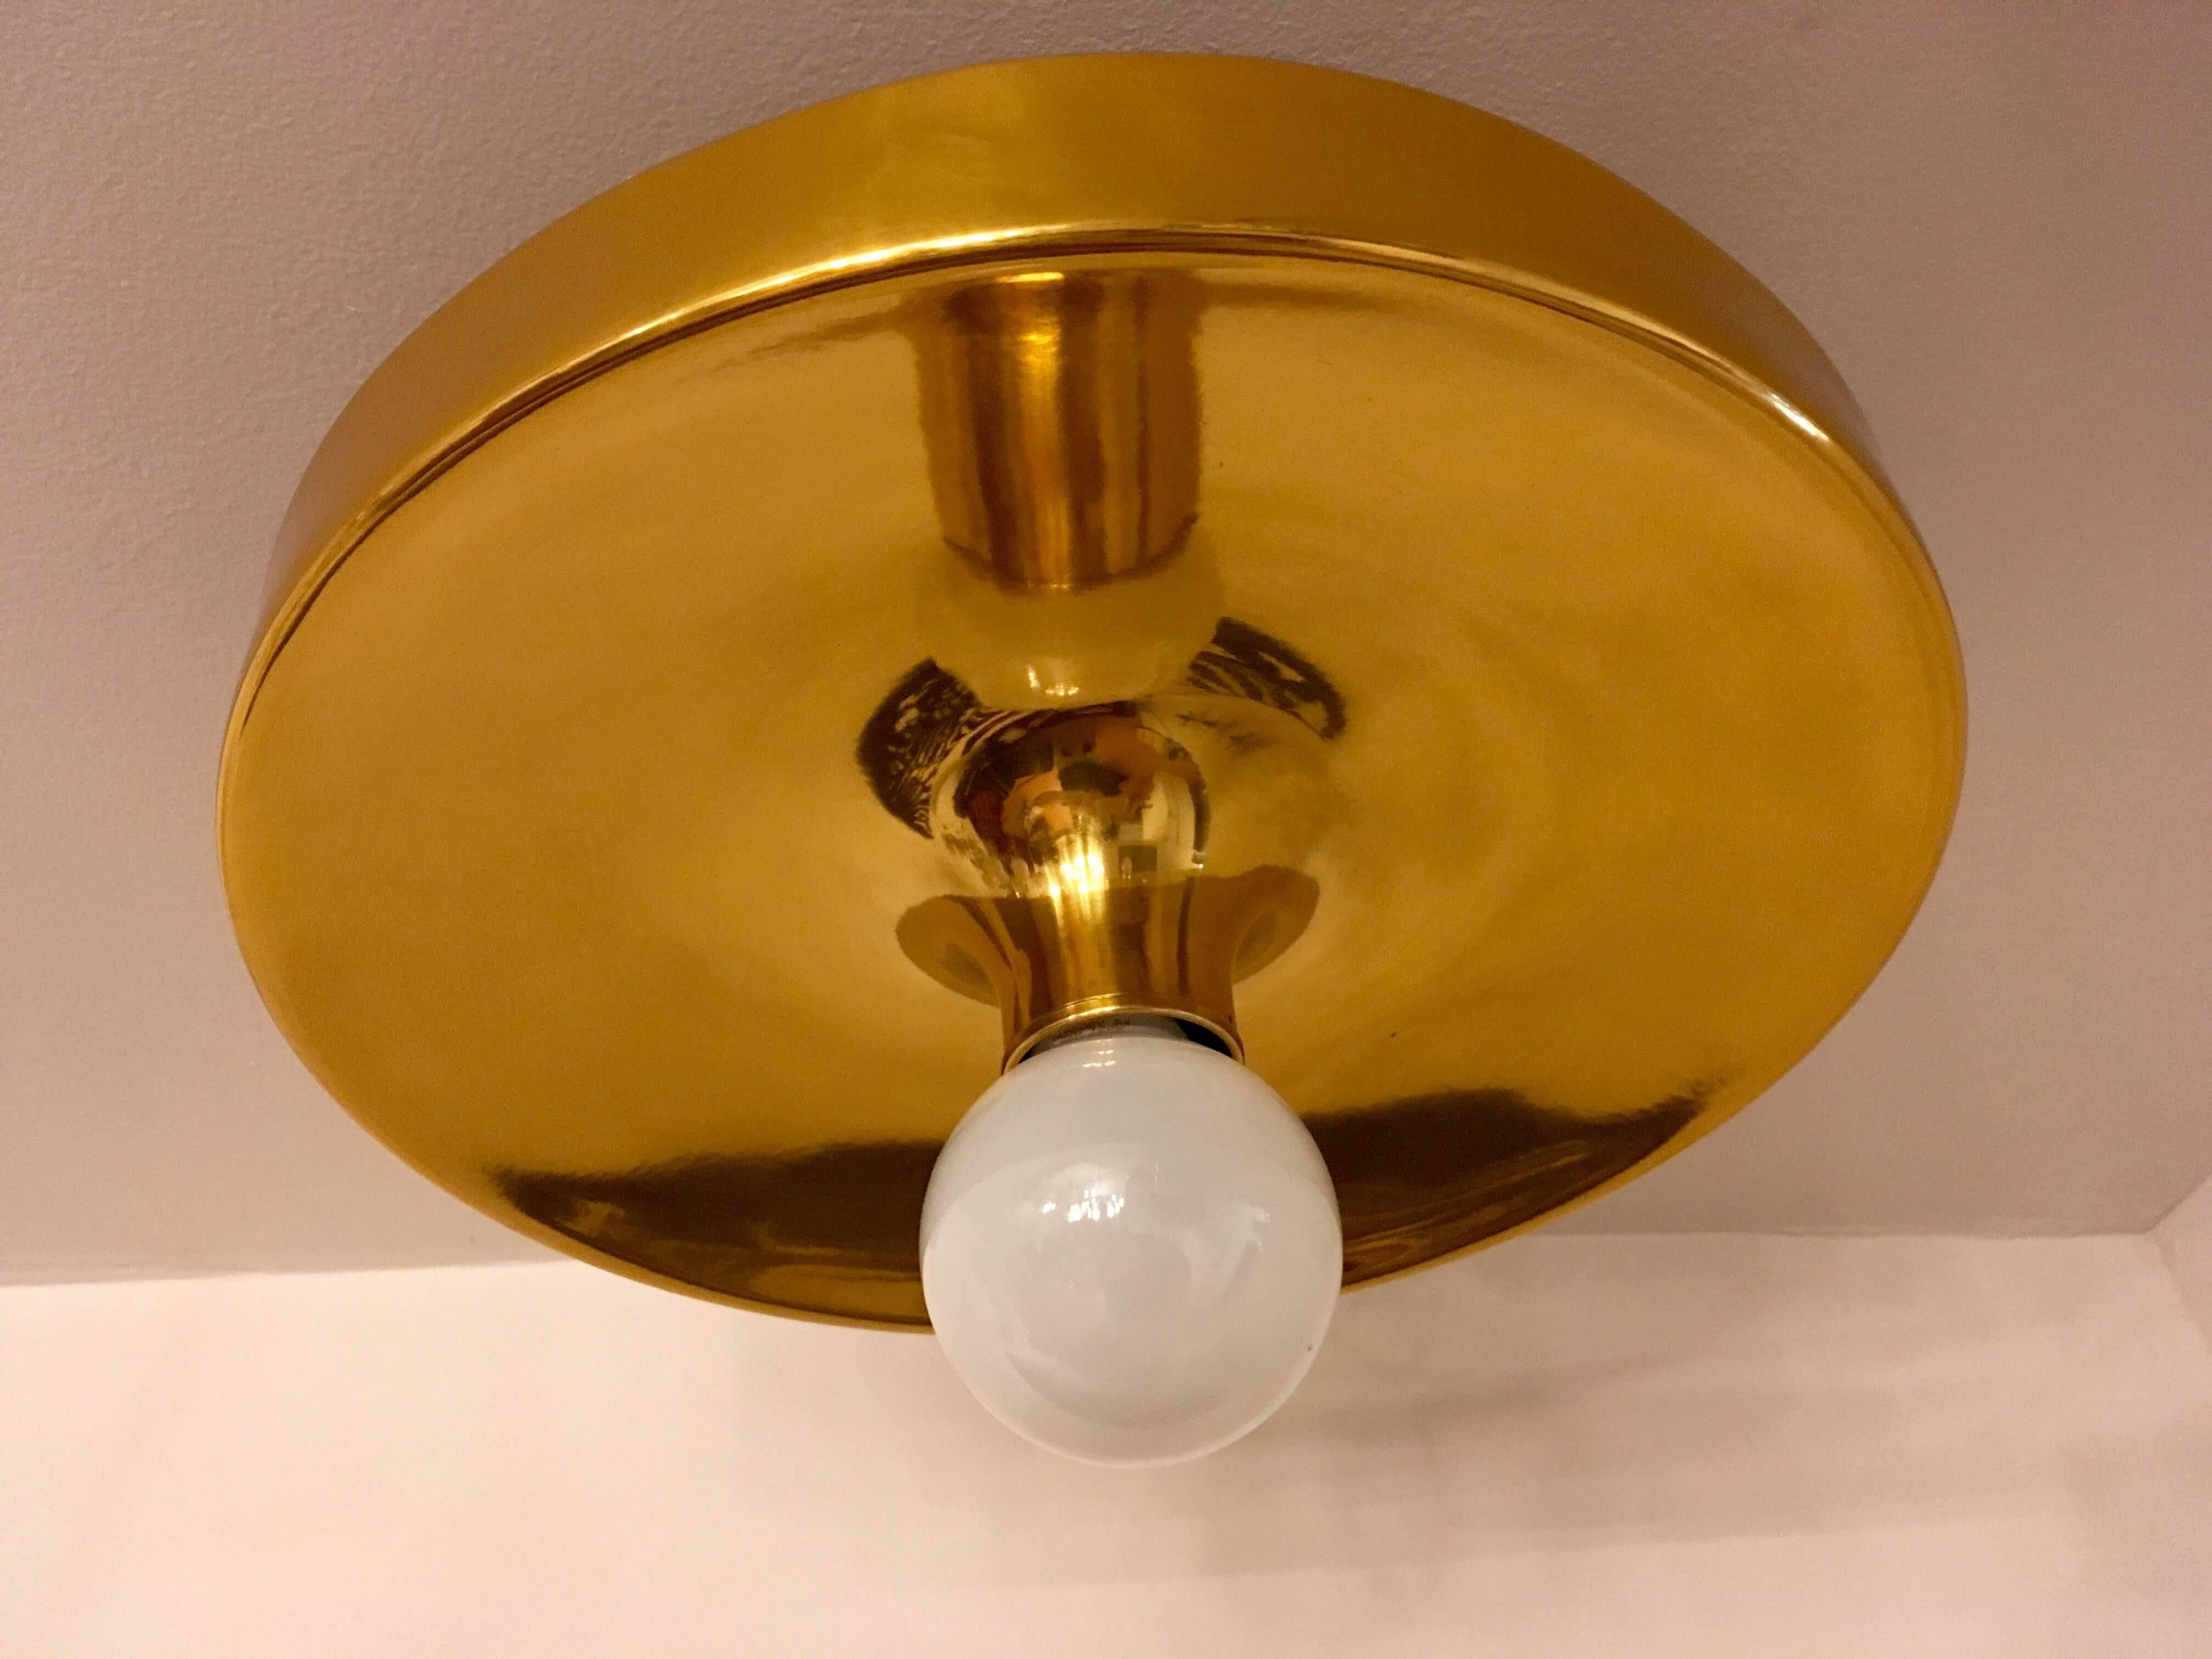 An original set of 1960s space age flush ceiling lights made by Honsel in polished gold mirror enamel. Charlotte Perriand used this lamp in apartments at the Les Arcs ski resort. Newly rewired.